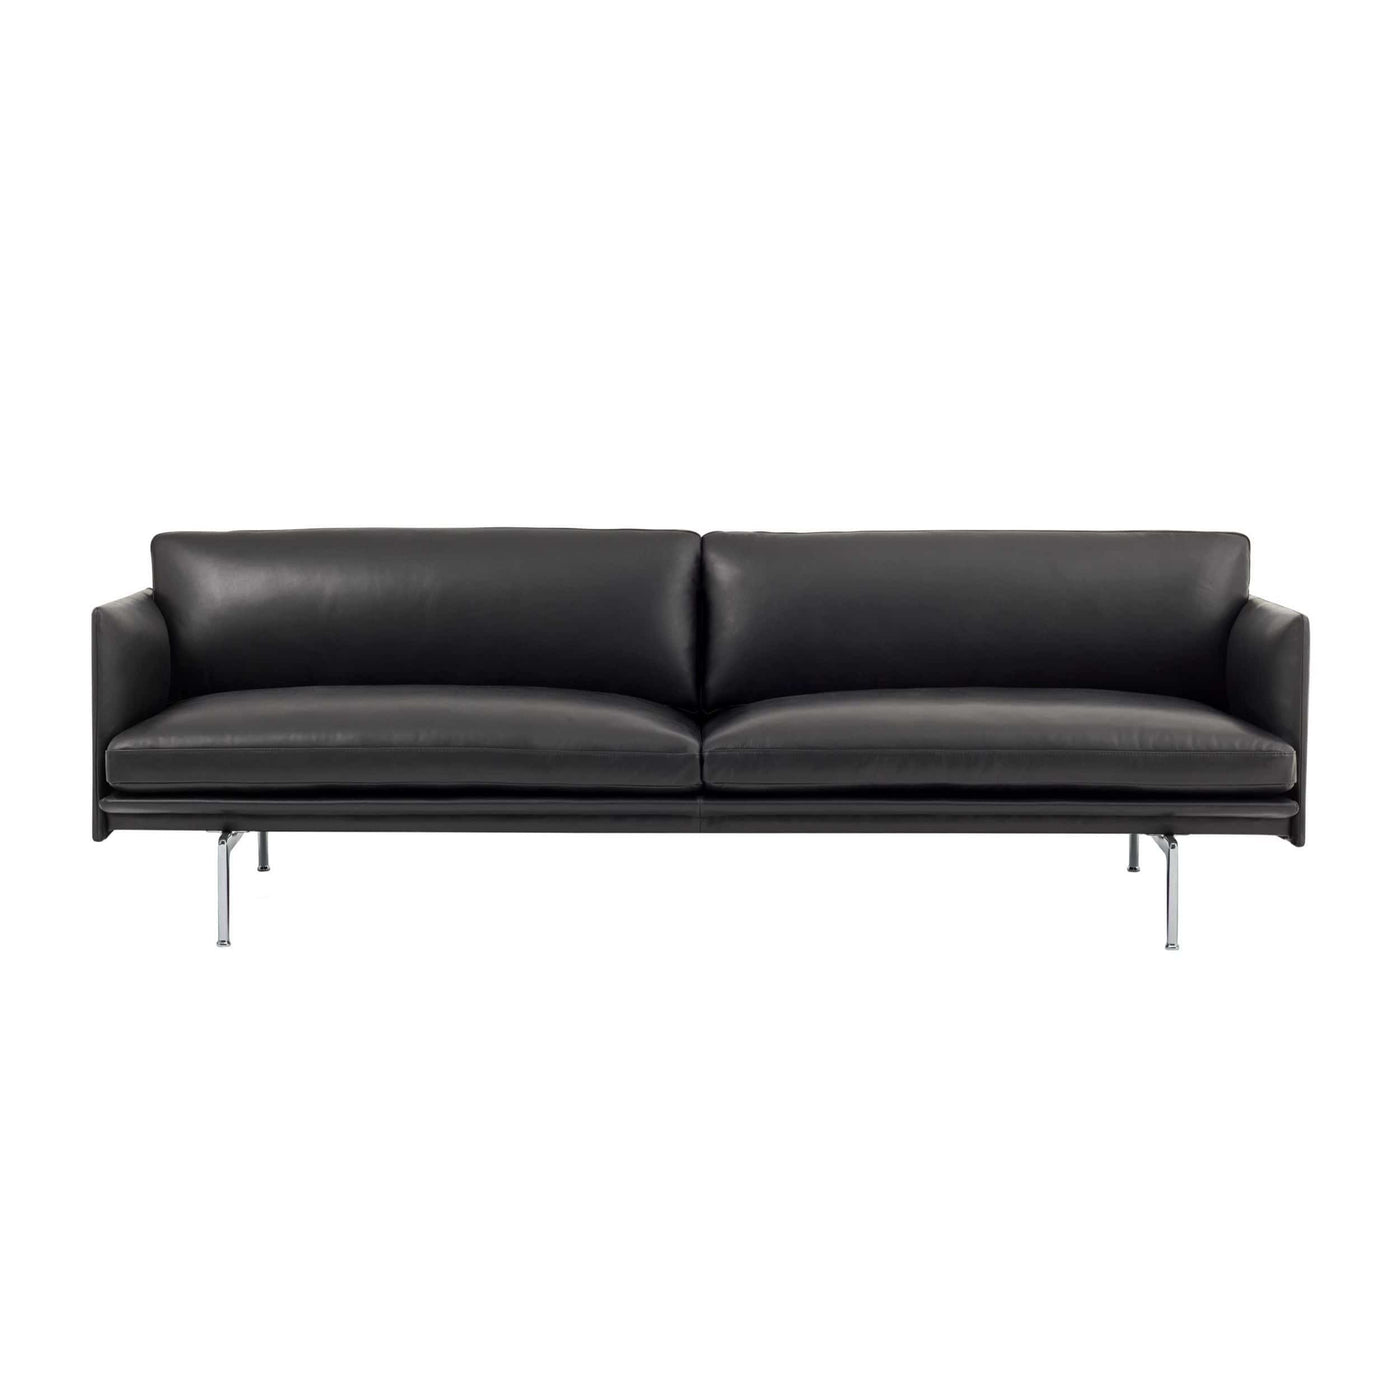 Muuto Outline 3 seater sofa with polished aluminium legs. Available from someday designs. #colour_black-refine-leather